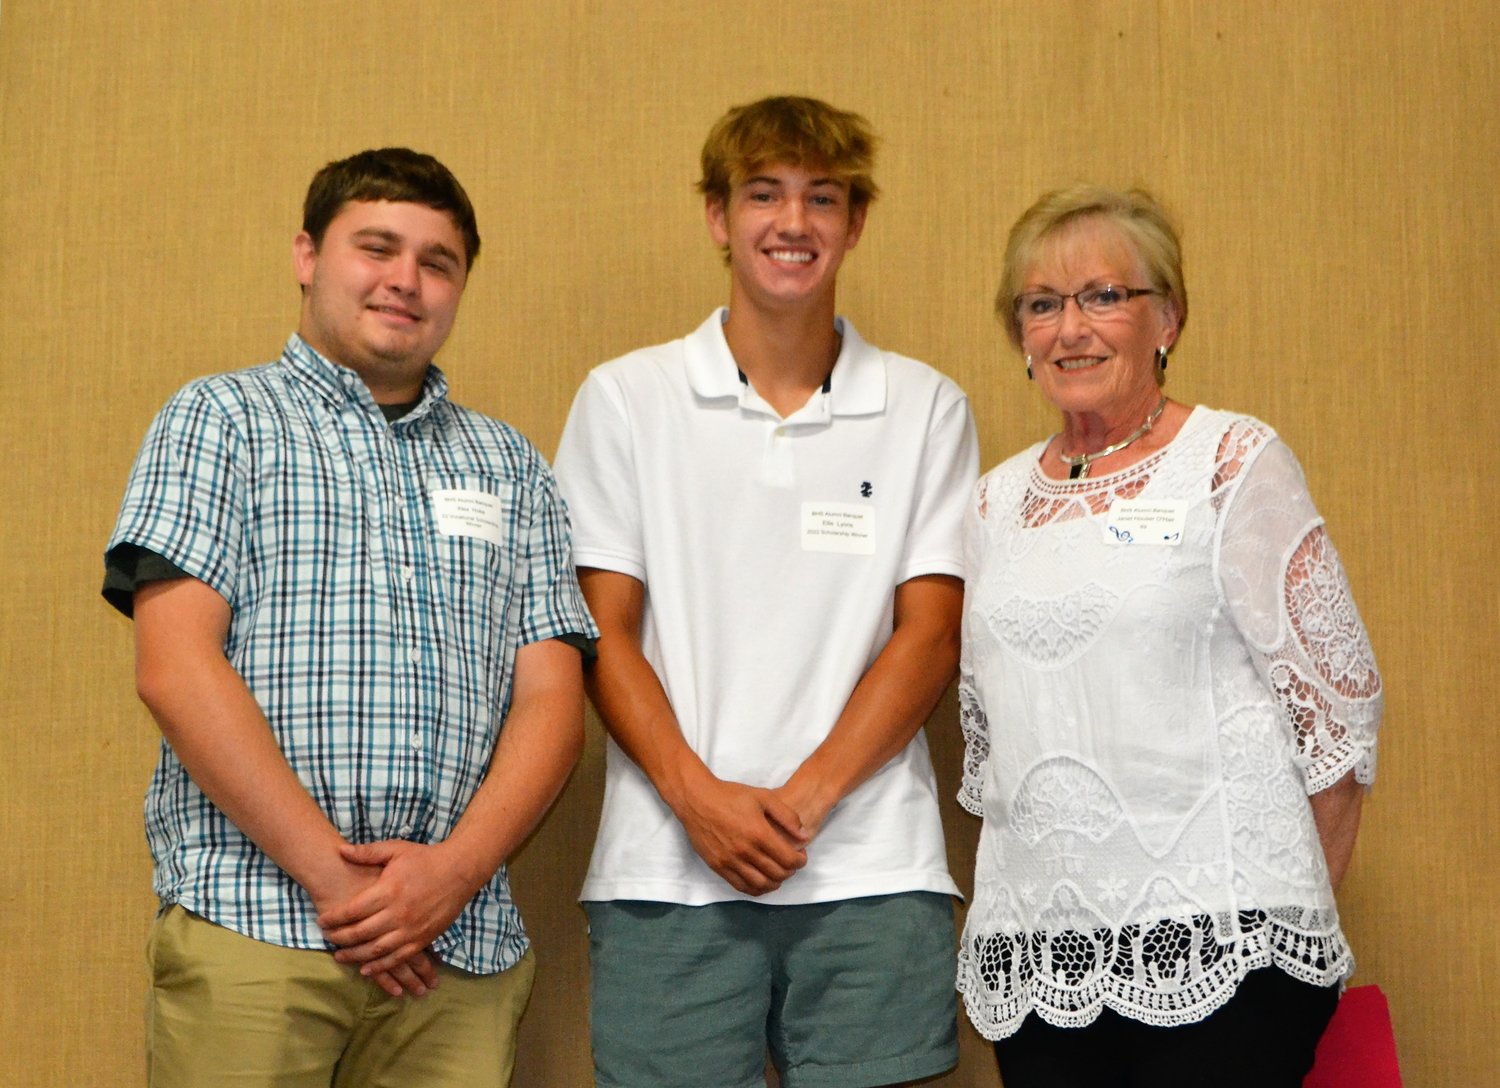 The Bainbridge High School Alumni Association recognized their 2022 $1,000 renewable scholarship winners who graduated from North Putnam High School. Pictured, from left, are Alex Hoke, the winner of the vocational trades scholarship to attend Vincennes University for welding and Ellis Lyons, who plans to attend Rose Hulman Institute of Technology this fall majoring in computer engineering, and Janet O’Hair, who chairs the BHS Alumni scholarship committee.